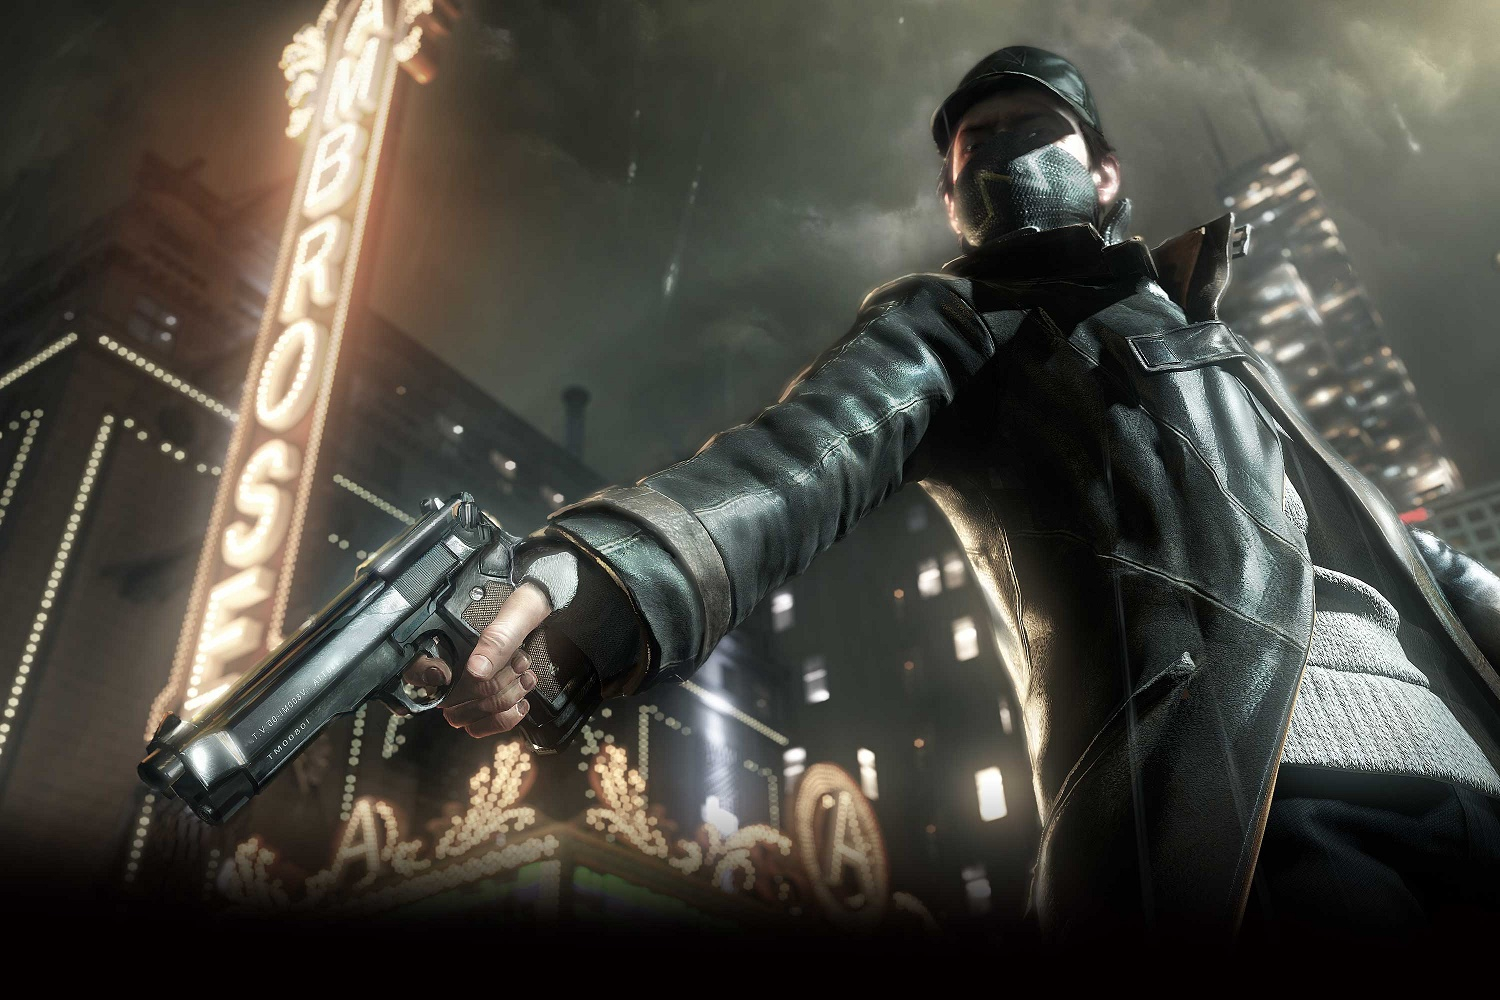 Watch Dogs and the Stanley Parable are currently free on the Epic Games Store